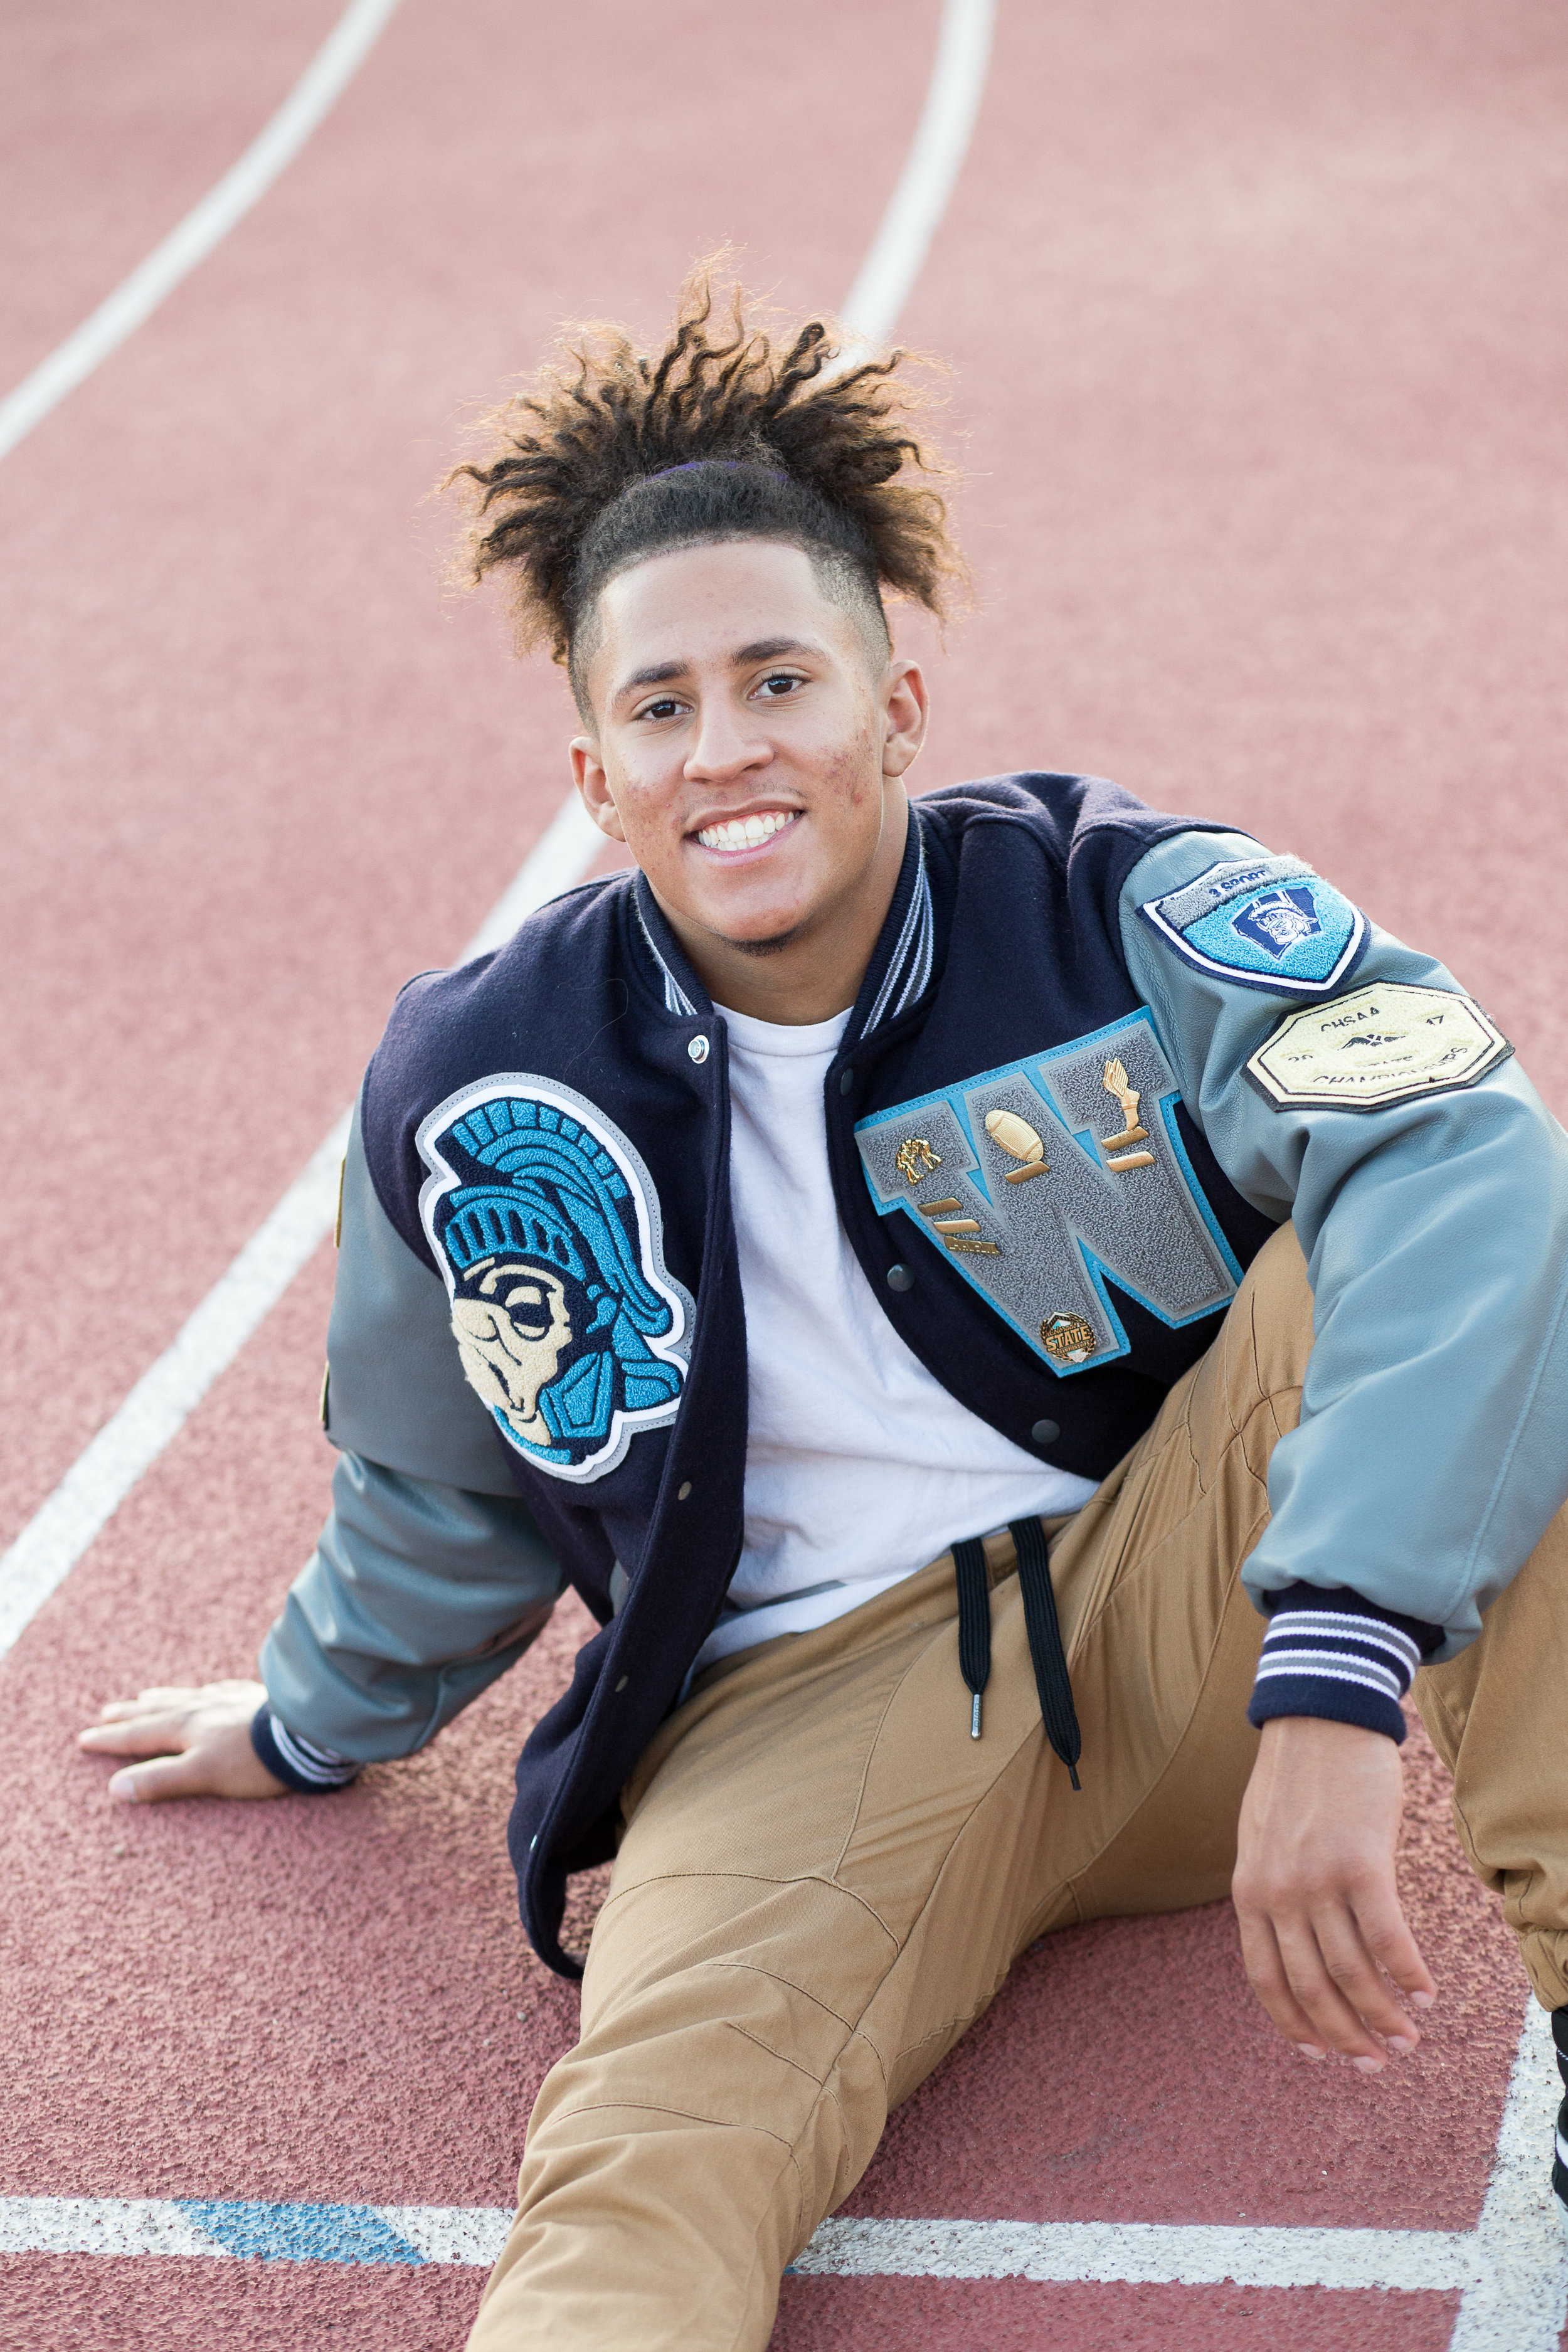 Senior in varsity jacket sitting on a track leaning back on hand smiling at camera Stacy Carosa Photography Colorado Springs